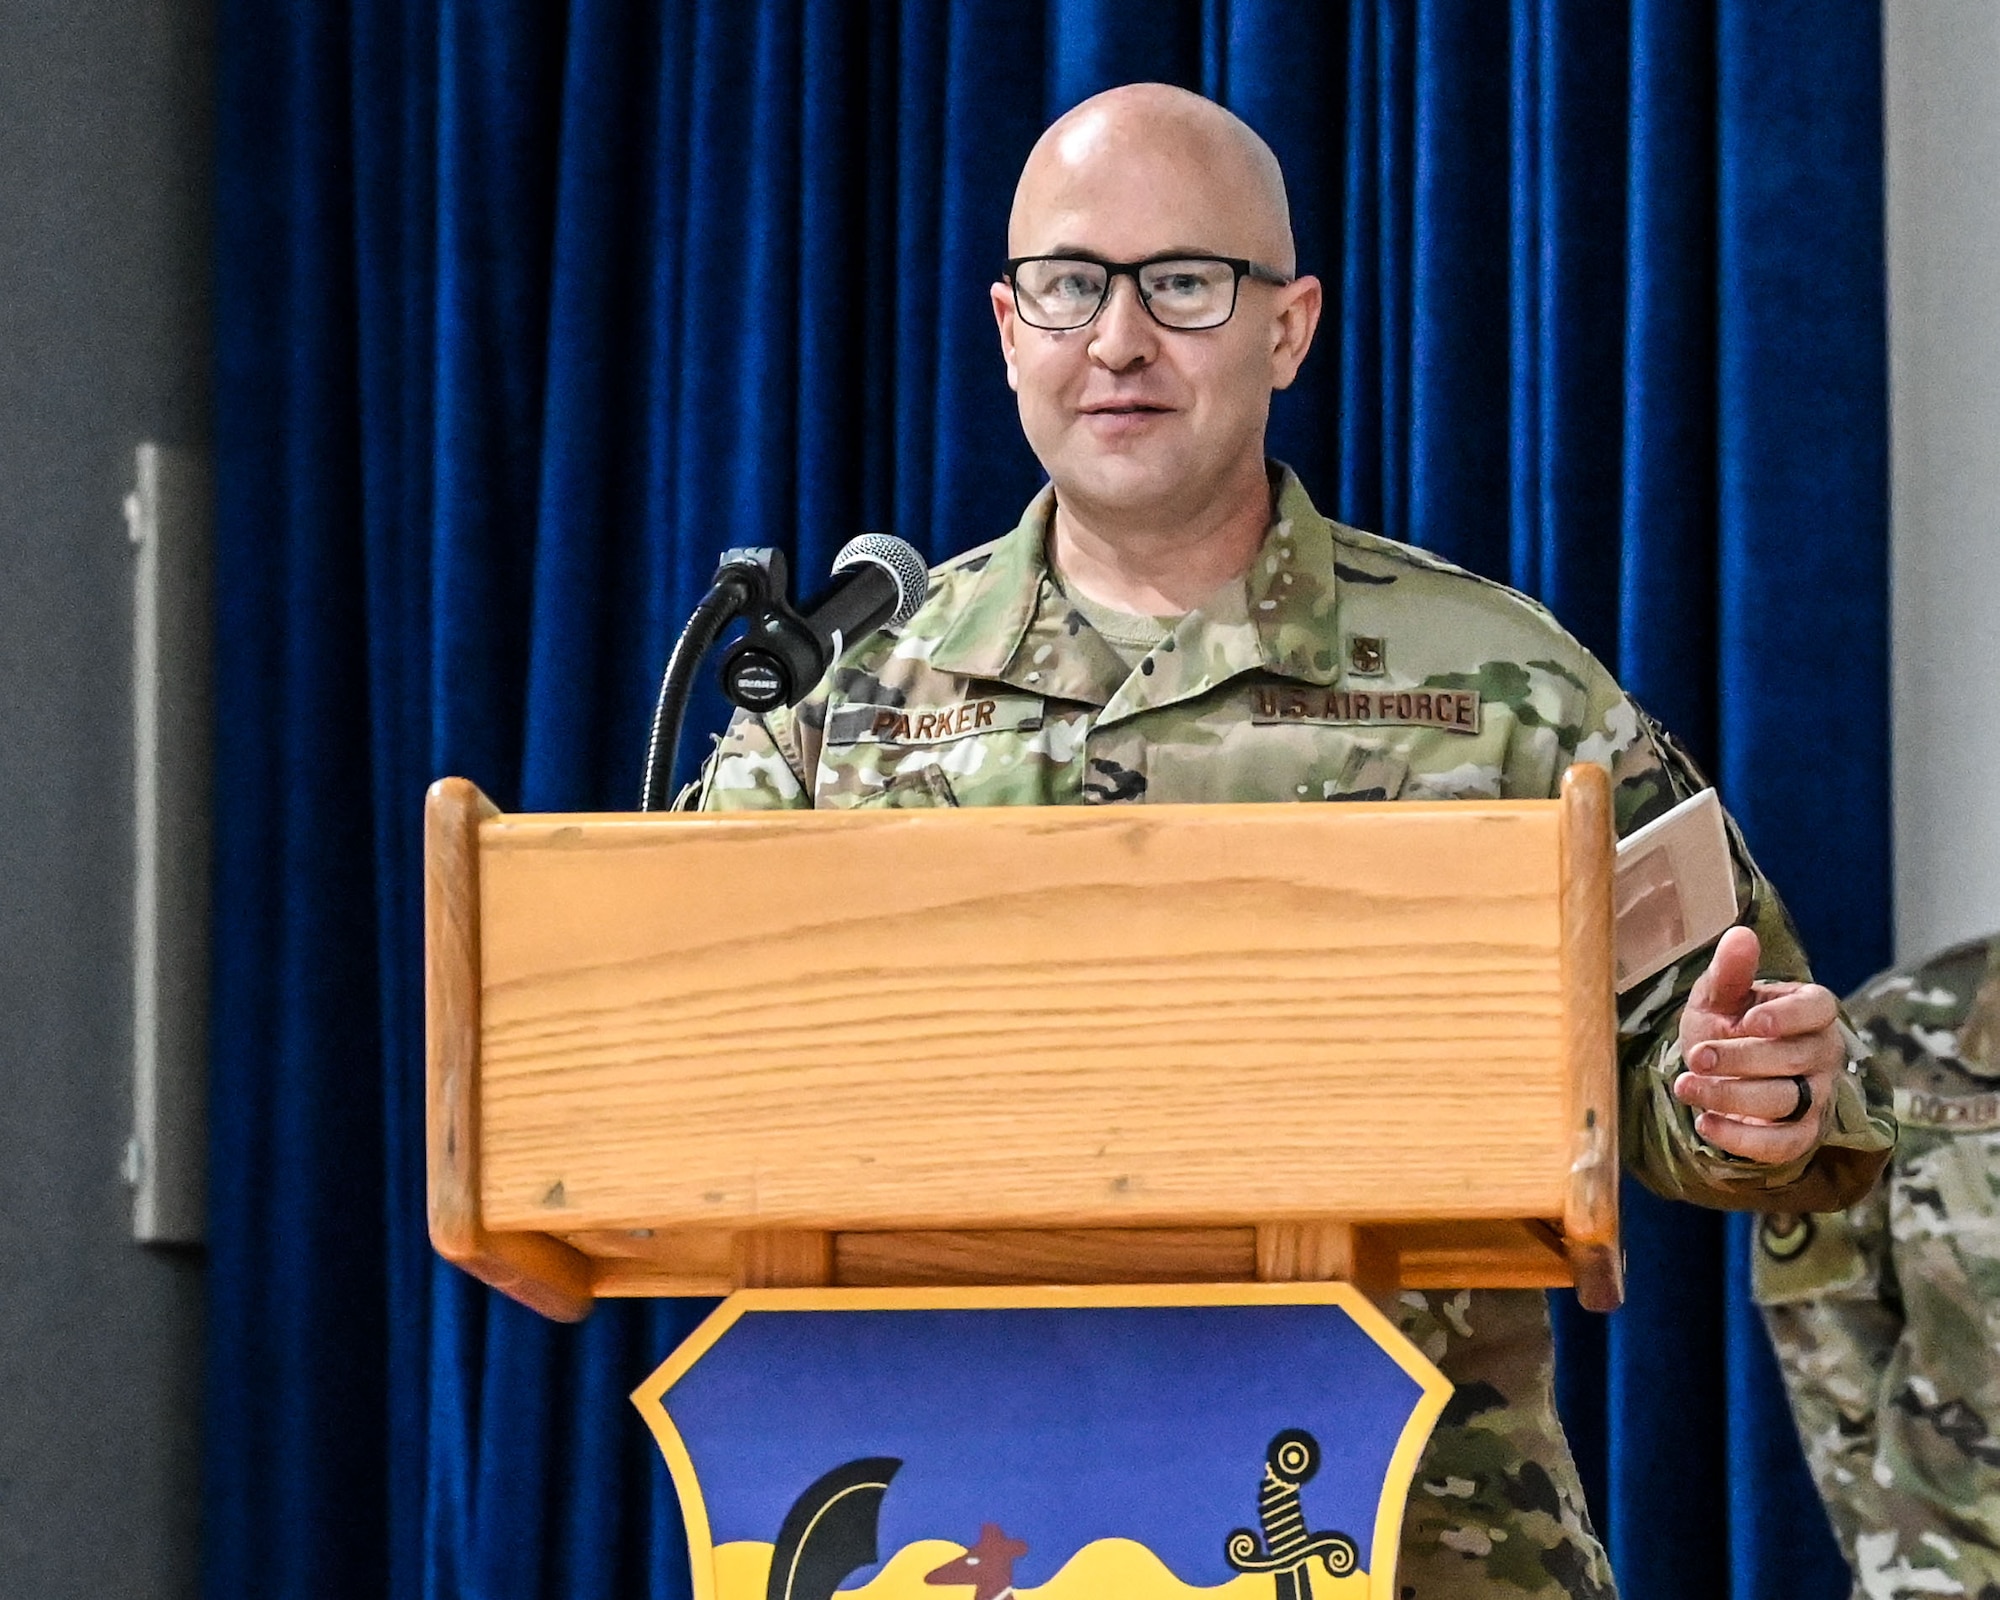 Lt. Col. Christopher Parker, 386th Expeditionary Medical Squadron commander, addresses his new squadron during a change of command ceremony at Ali Al Salem Air Base, Kuwait, May 30, 2023. Parker formally took over command of the unit from Lt. Col. John Stubbs.